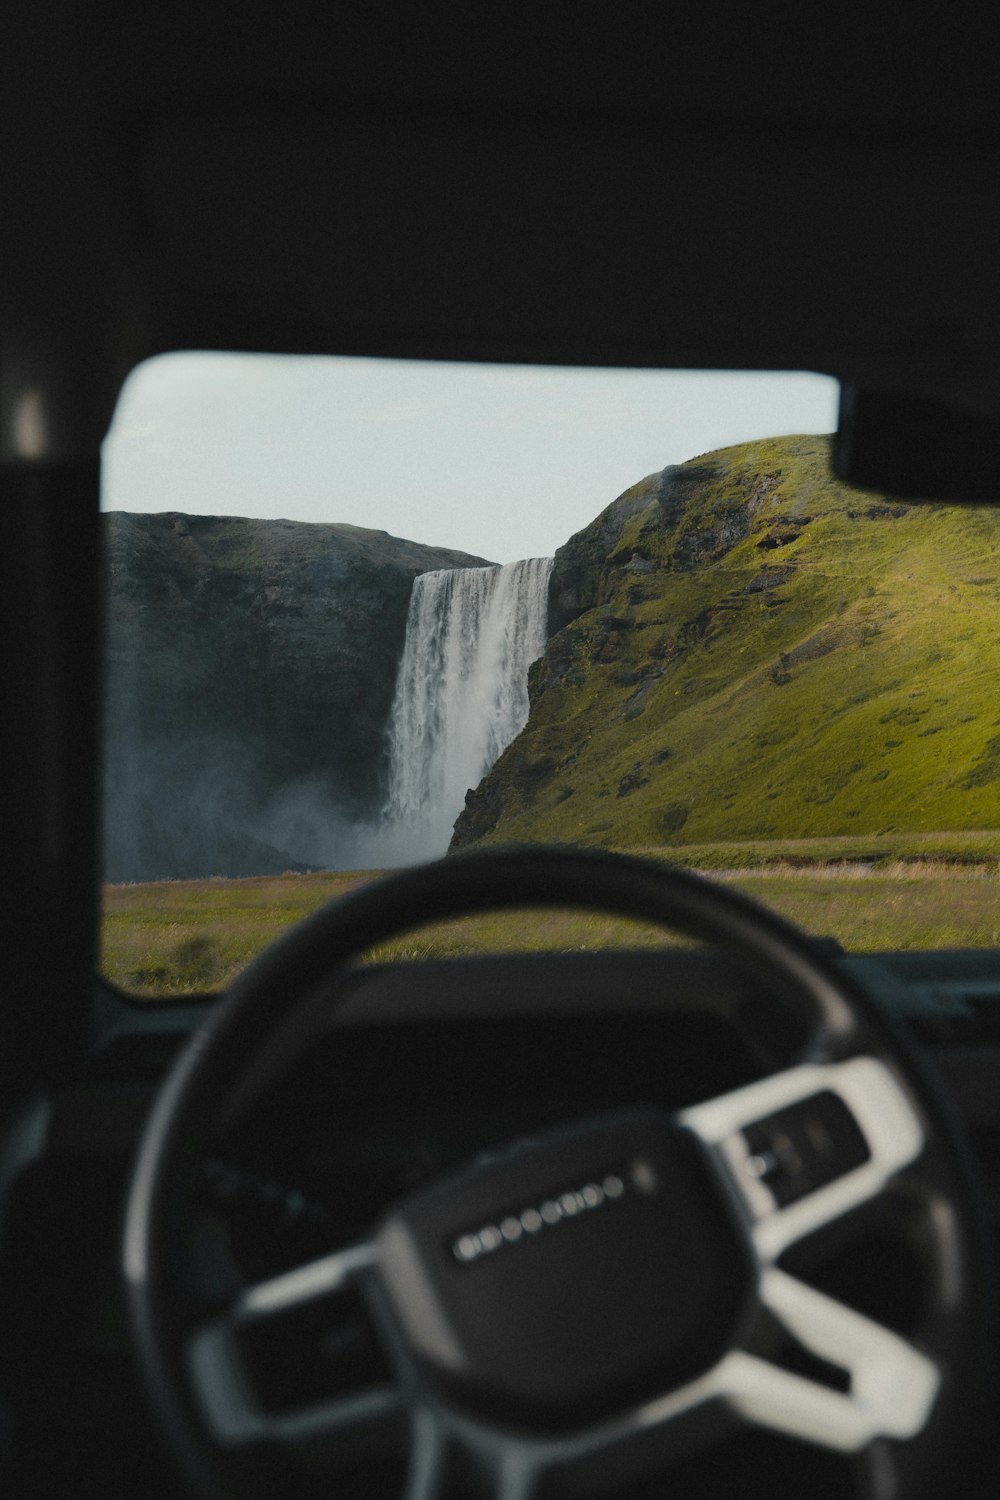 a view of a waterfall from inside a vehicle